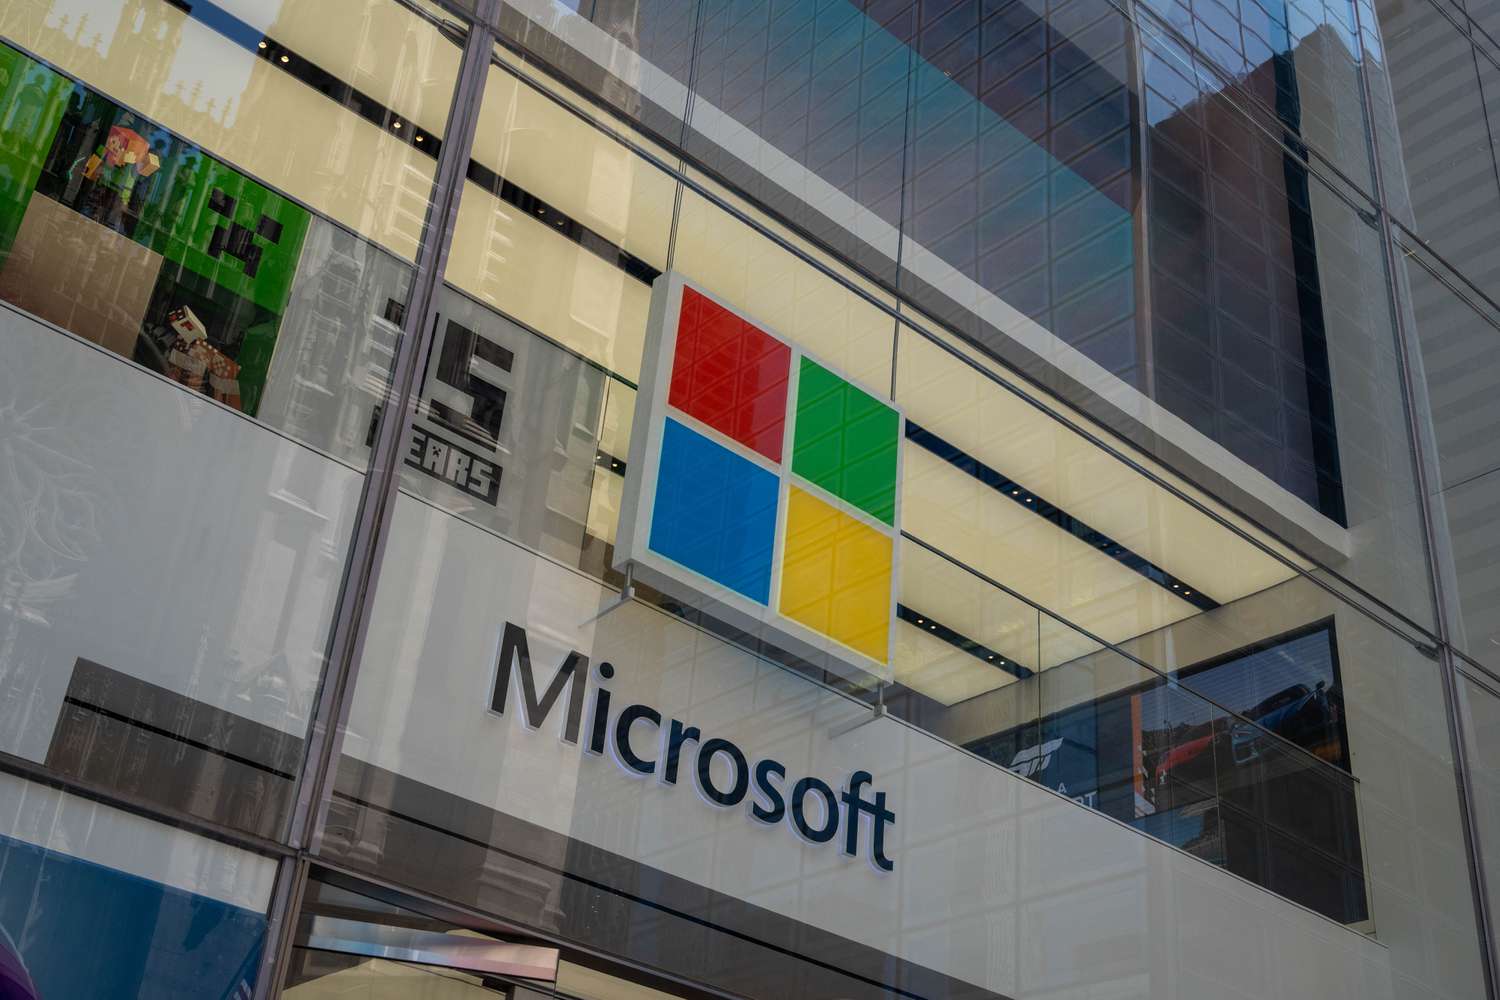 What You Need To Know Ahead of Microsoft’s Earnings Report [Video]